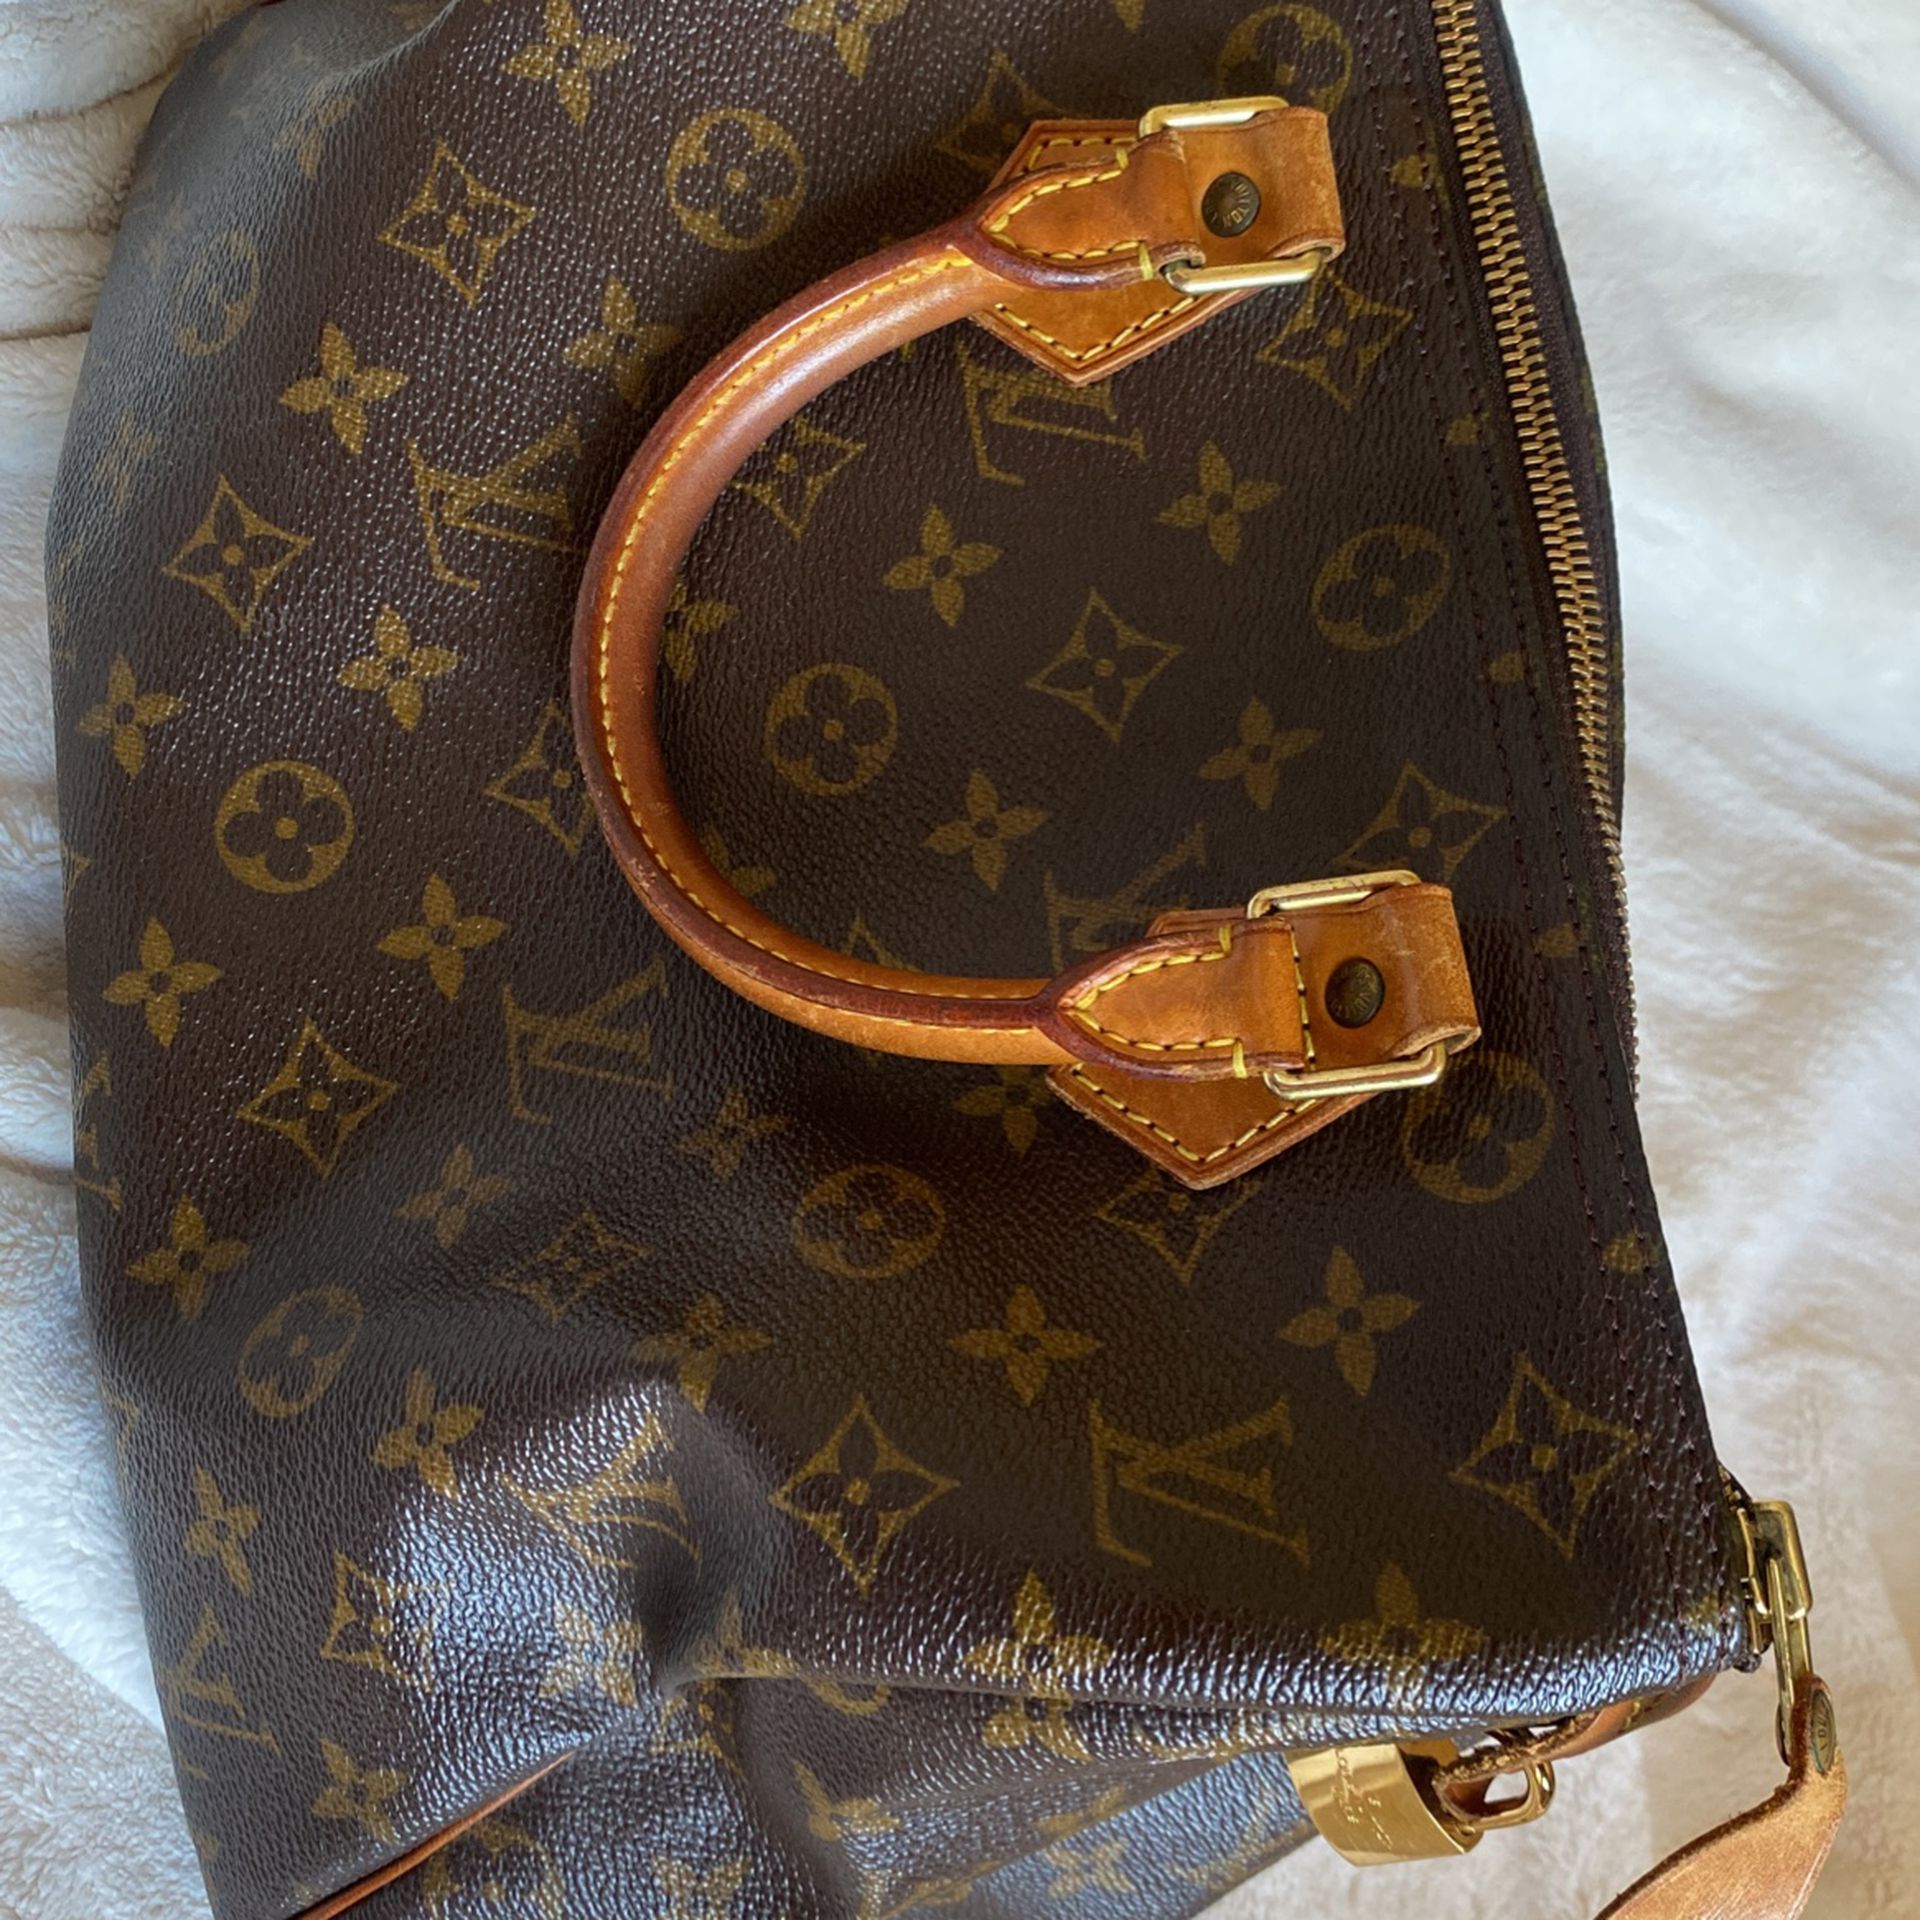 Black LV On-The-Go Tote for Sale in Anaheim, CA - OfferUp